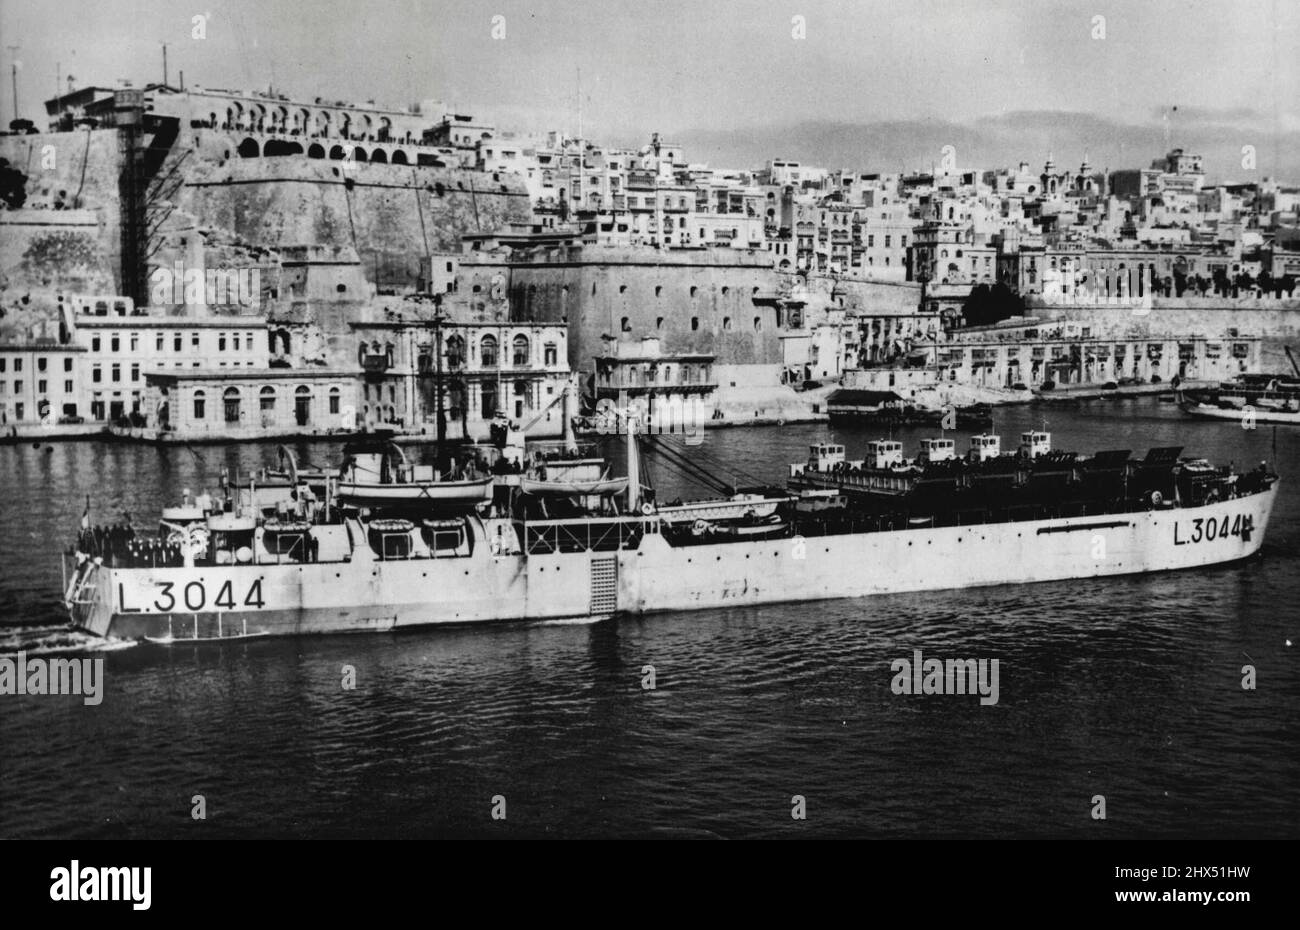 Atomic Equipment For Woomera -- The royal navy tank landing craft 'Narvik' sails out of grand harbour, Malta, recently on her voyage to Australia. She, and the 'Zeebrugge,' another tank landing craft, are en route from Portsmouth, England, loaded with atomic equipment for the Woomera rocket range, the site of Britain's forthcoming atomic explosion. Among the gear carried is armour-plated cable, portable electric power station and assault craft. March 8, 1952. (Photo by Associated Press Photo). Stock Photo